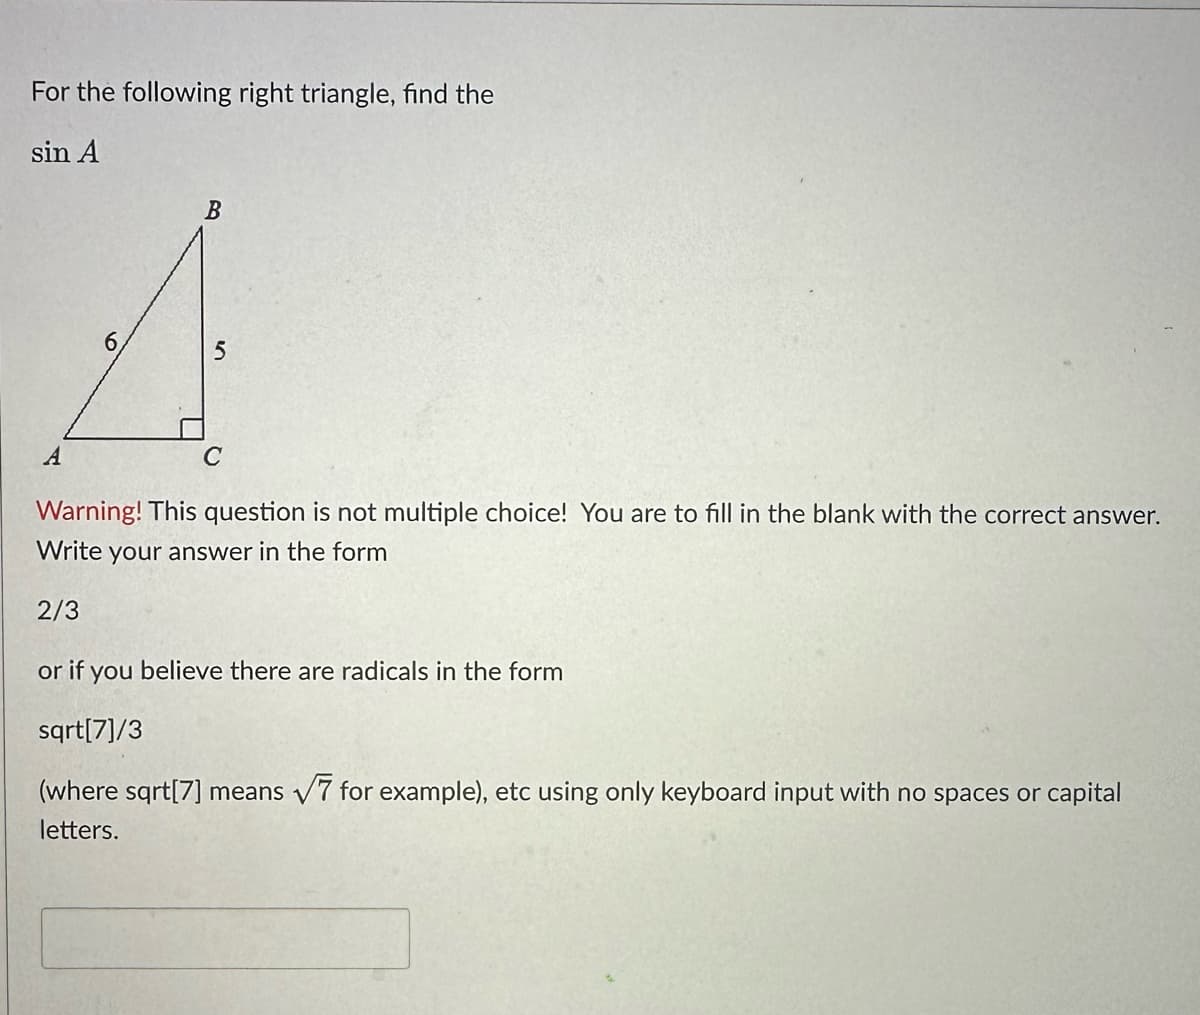 For the following right triangle, find the
sin A
A
6
B
5
C
Warning! This question is not multiple choice! You are to fill in the blank with the correct answer.
Write your answer in the form
2/3
or if you believe there are radicals in the form
sqrt[7]/3
(where sqrt[7] means √7 for example), etc using only keyboard input with no spaces or capital
letters.